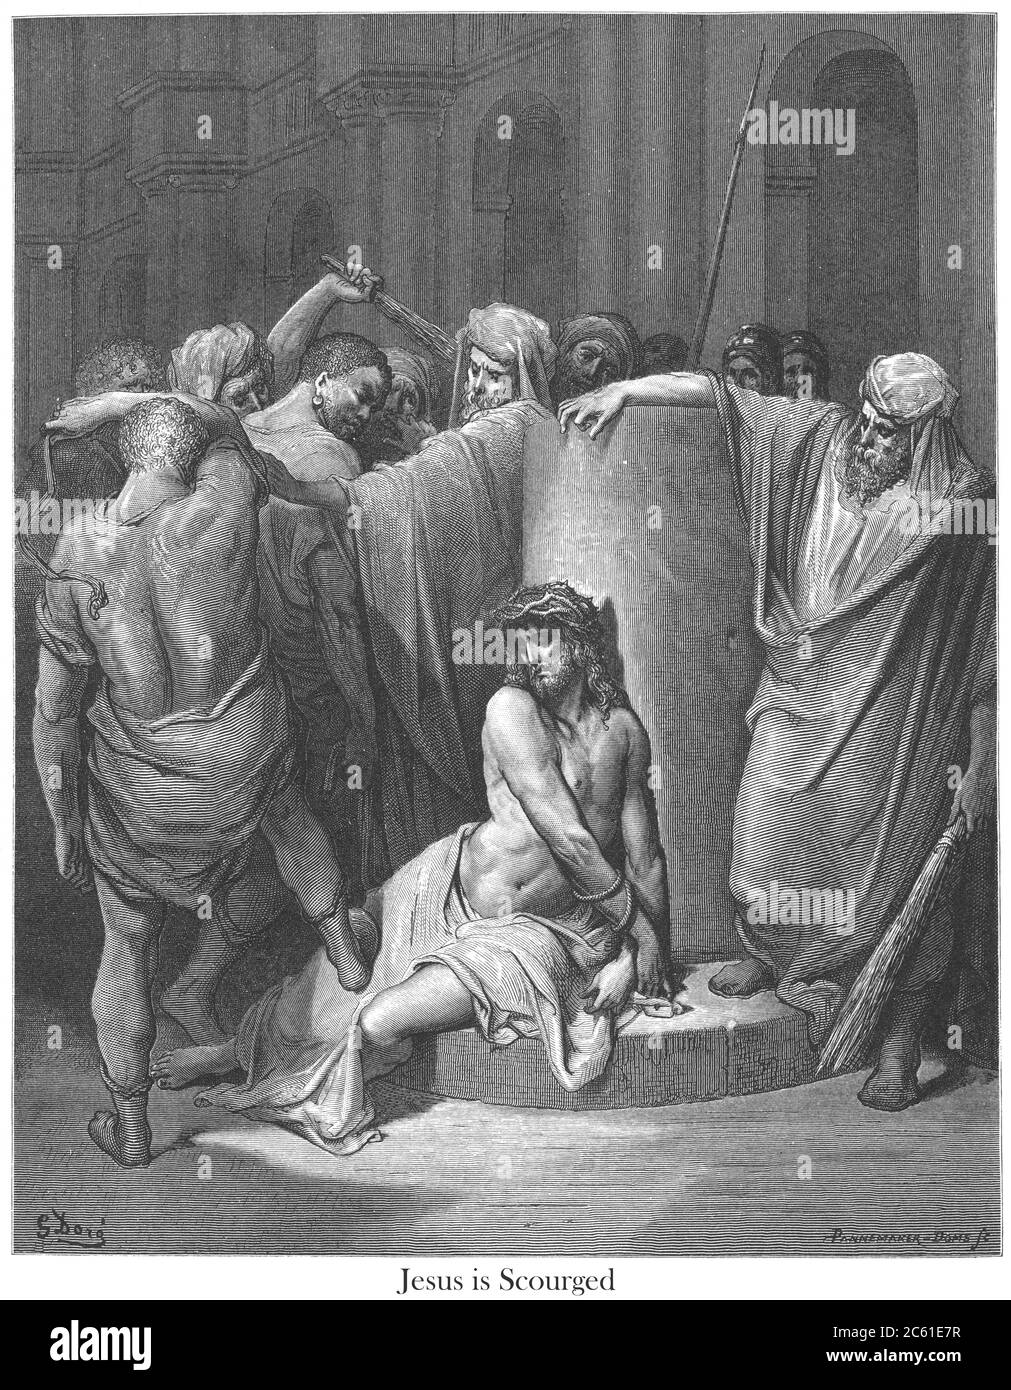 Jesus Scourged [Matthew 27:26] From the book 'Bible Gallery' Illustrated by Gustave Dore with Memoir of Dore and Descriptive Letter-press by Talbot W. Chambers D.D. Published by Cassell & Company Limited in London and simultaneously by Mame in Tours, France in 1866 Stock Photo